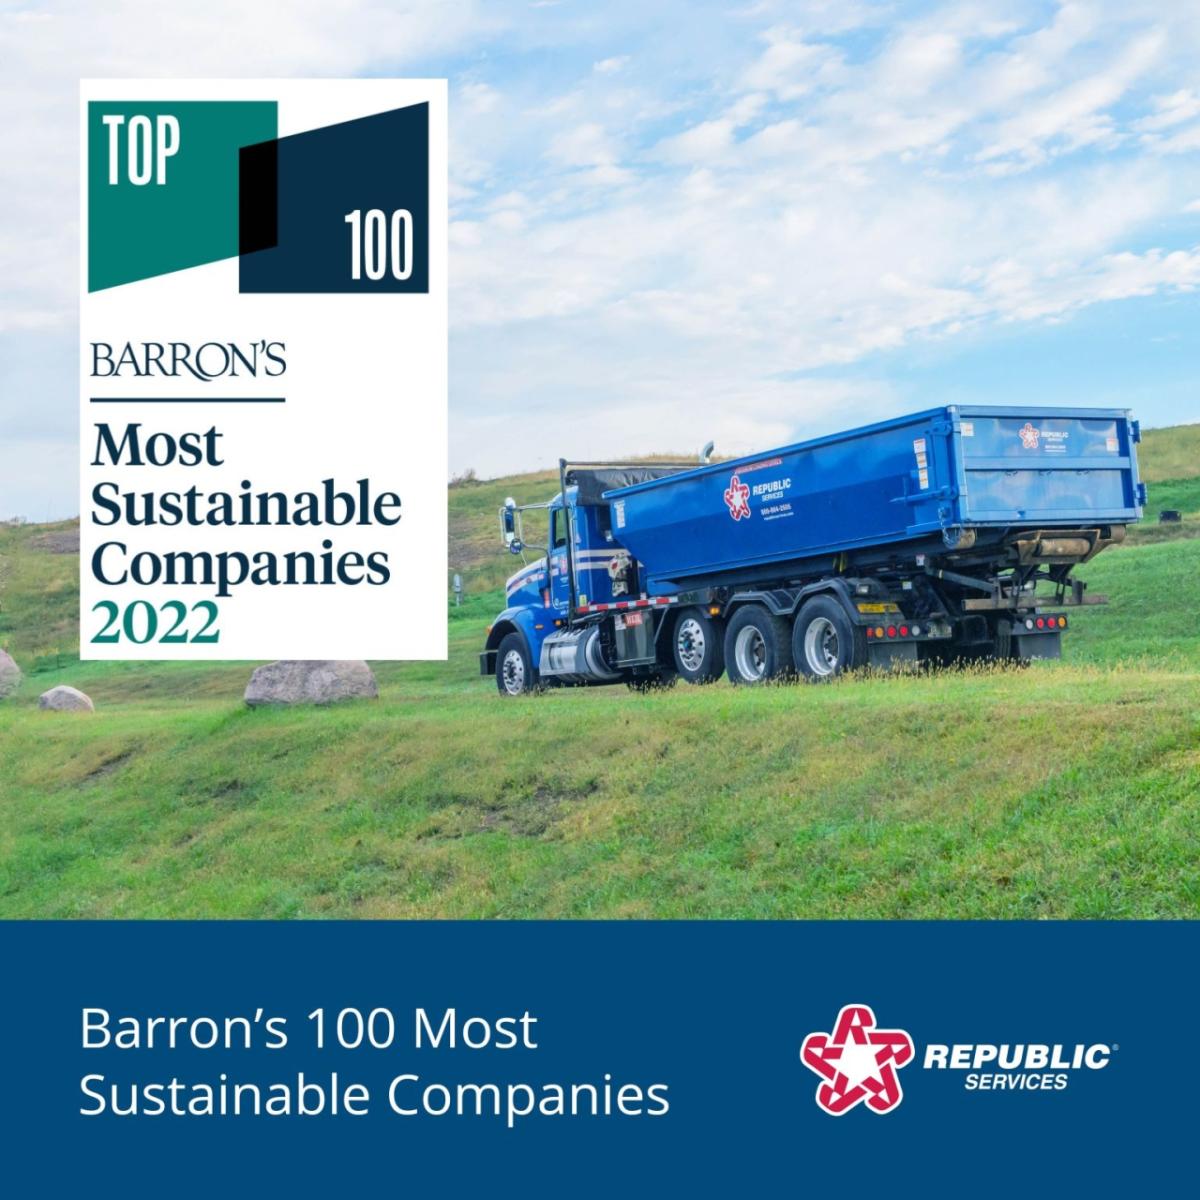 Barron's 100 Most Sustainable Companies with Republic Services truck